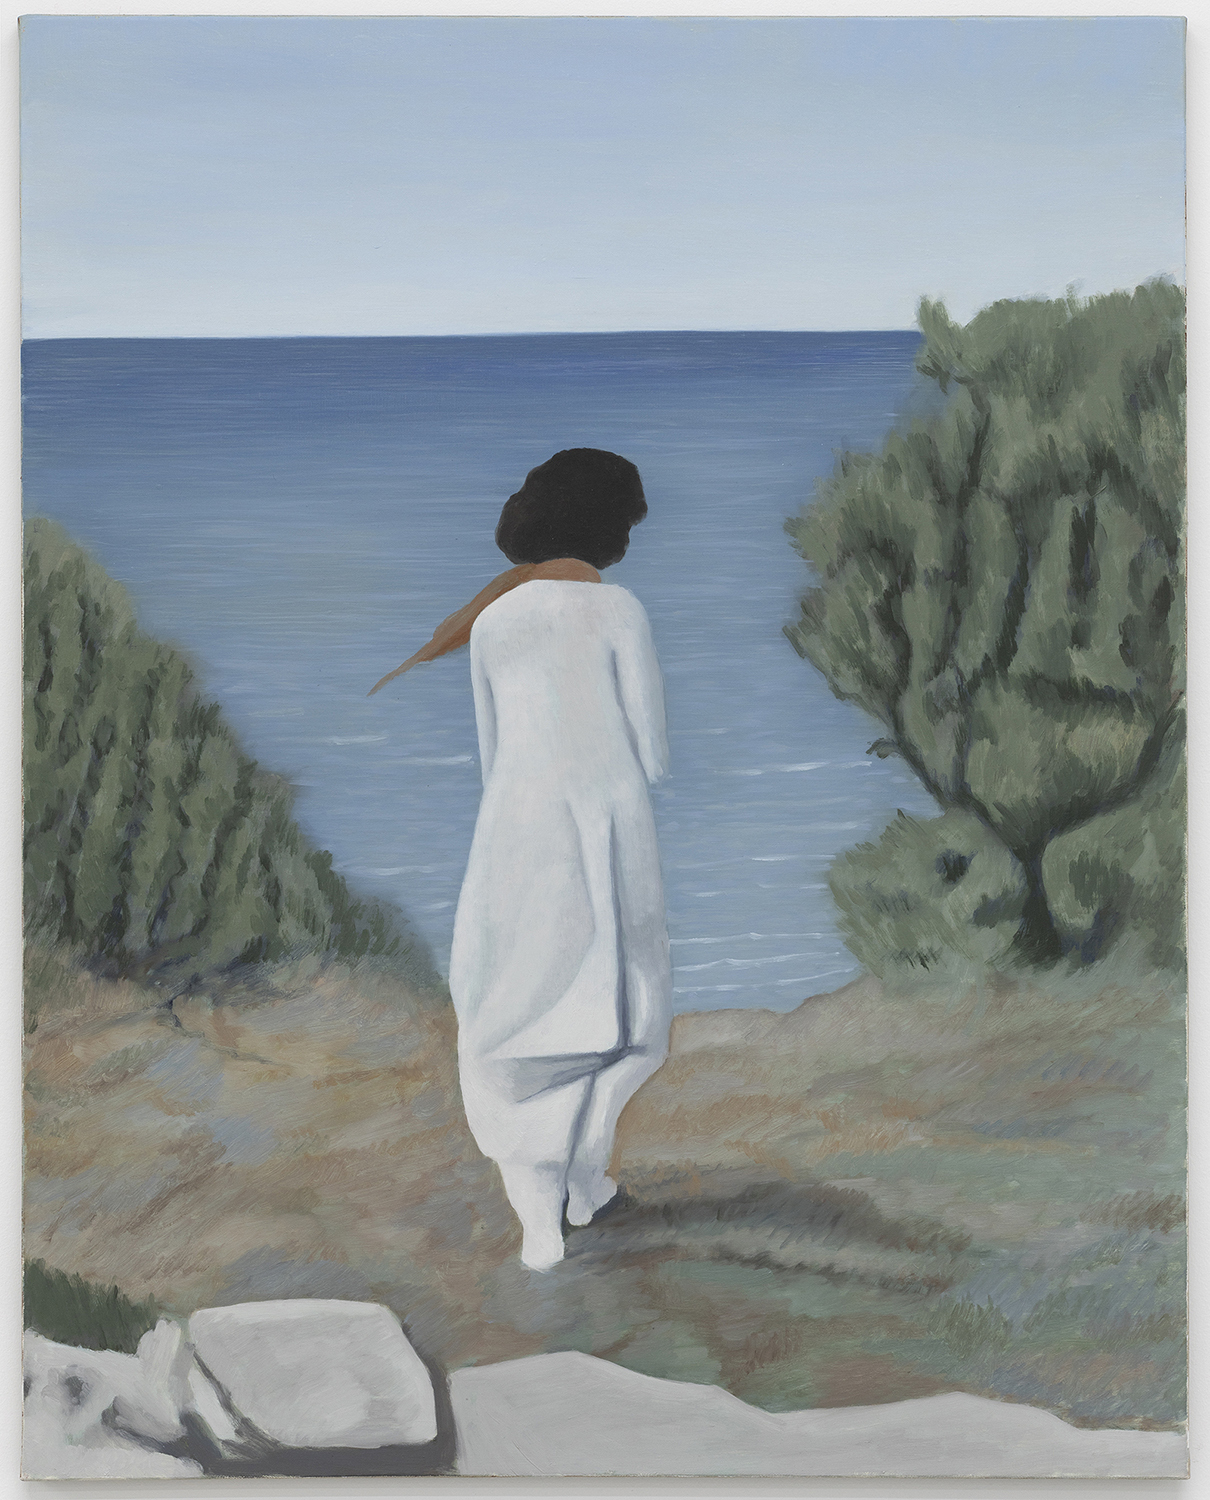 Johannes Sivertsen, By the sea (after Assia Djebar), 2020, oil on canvas, 92 x 73 cm